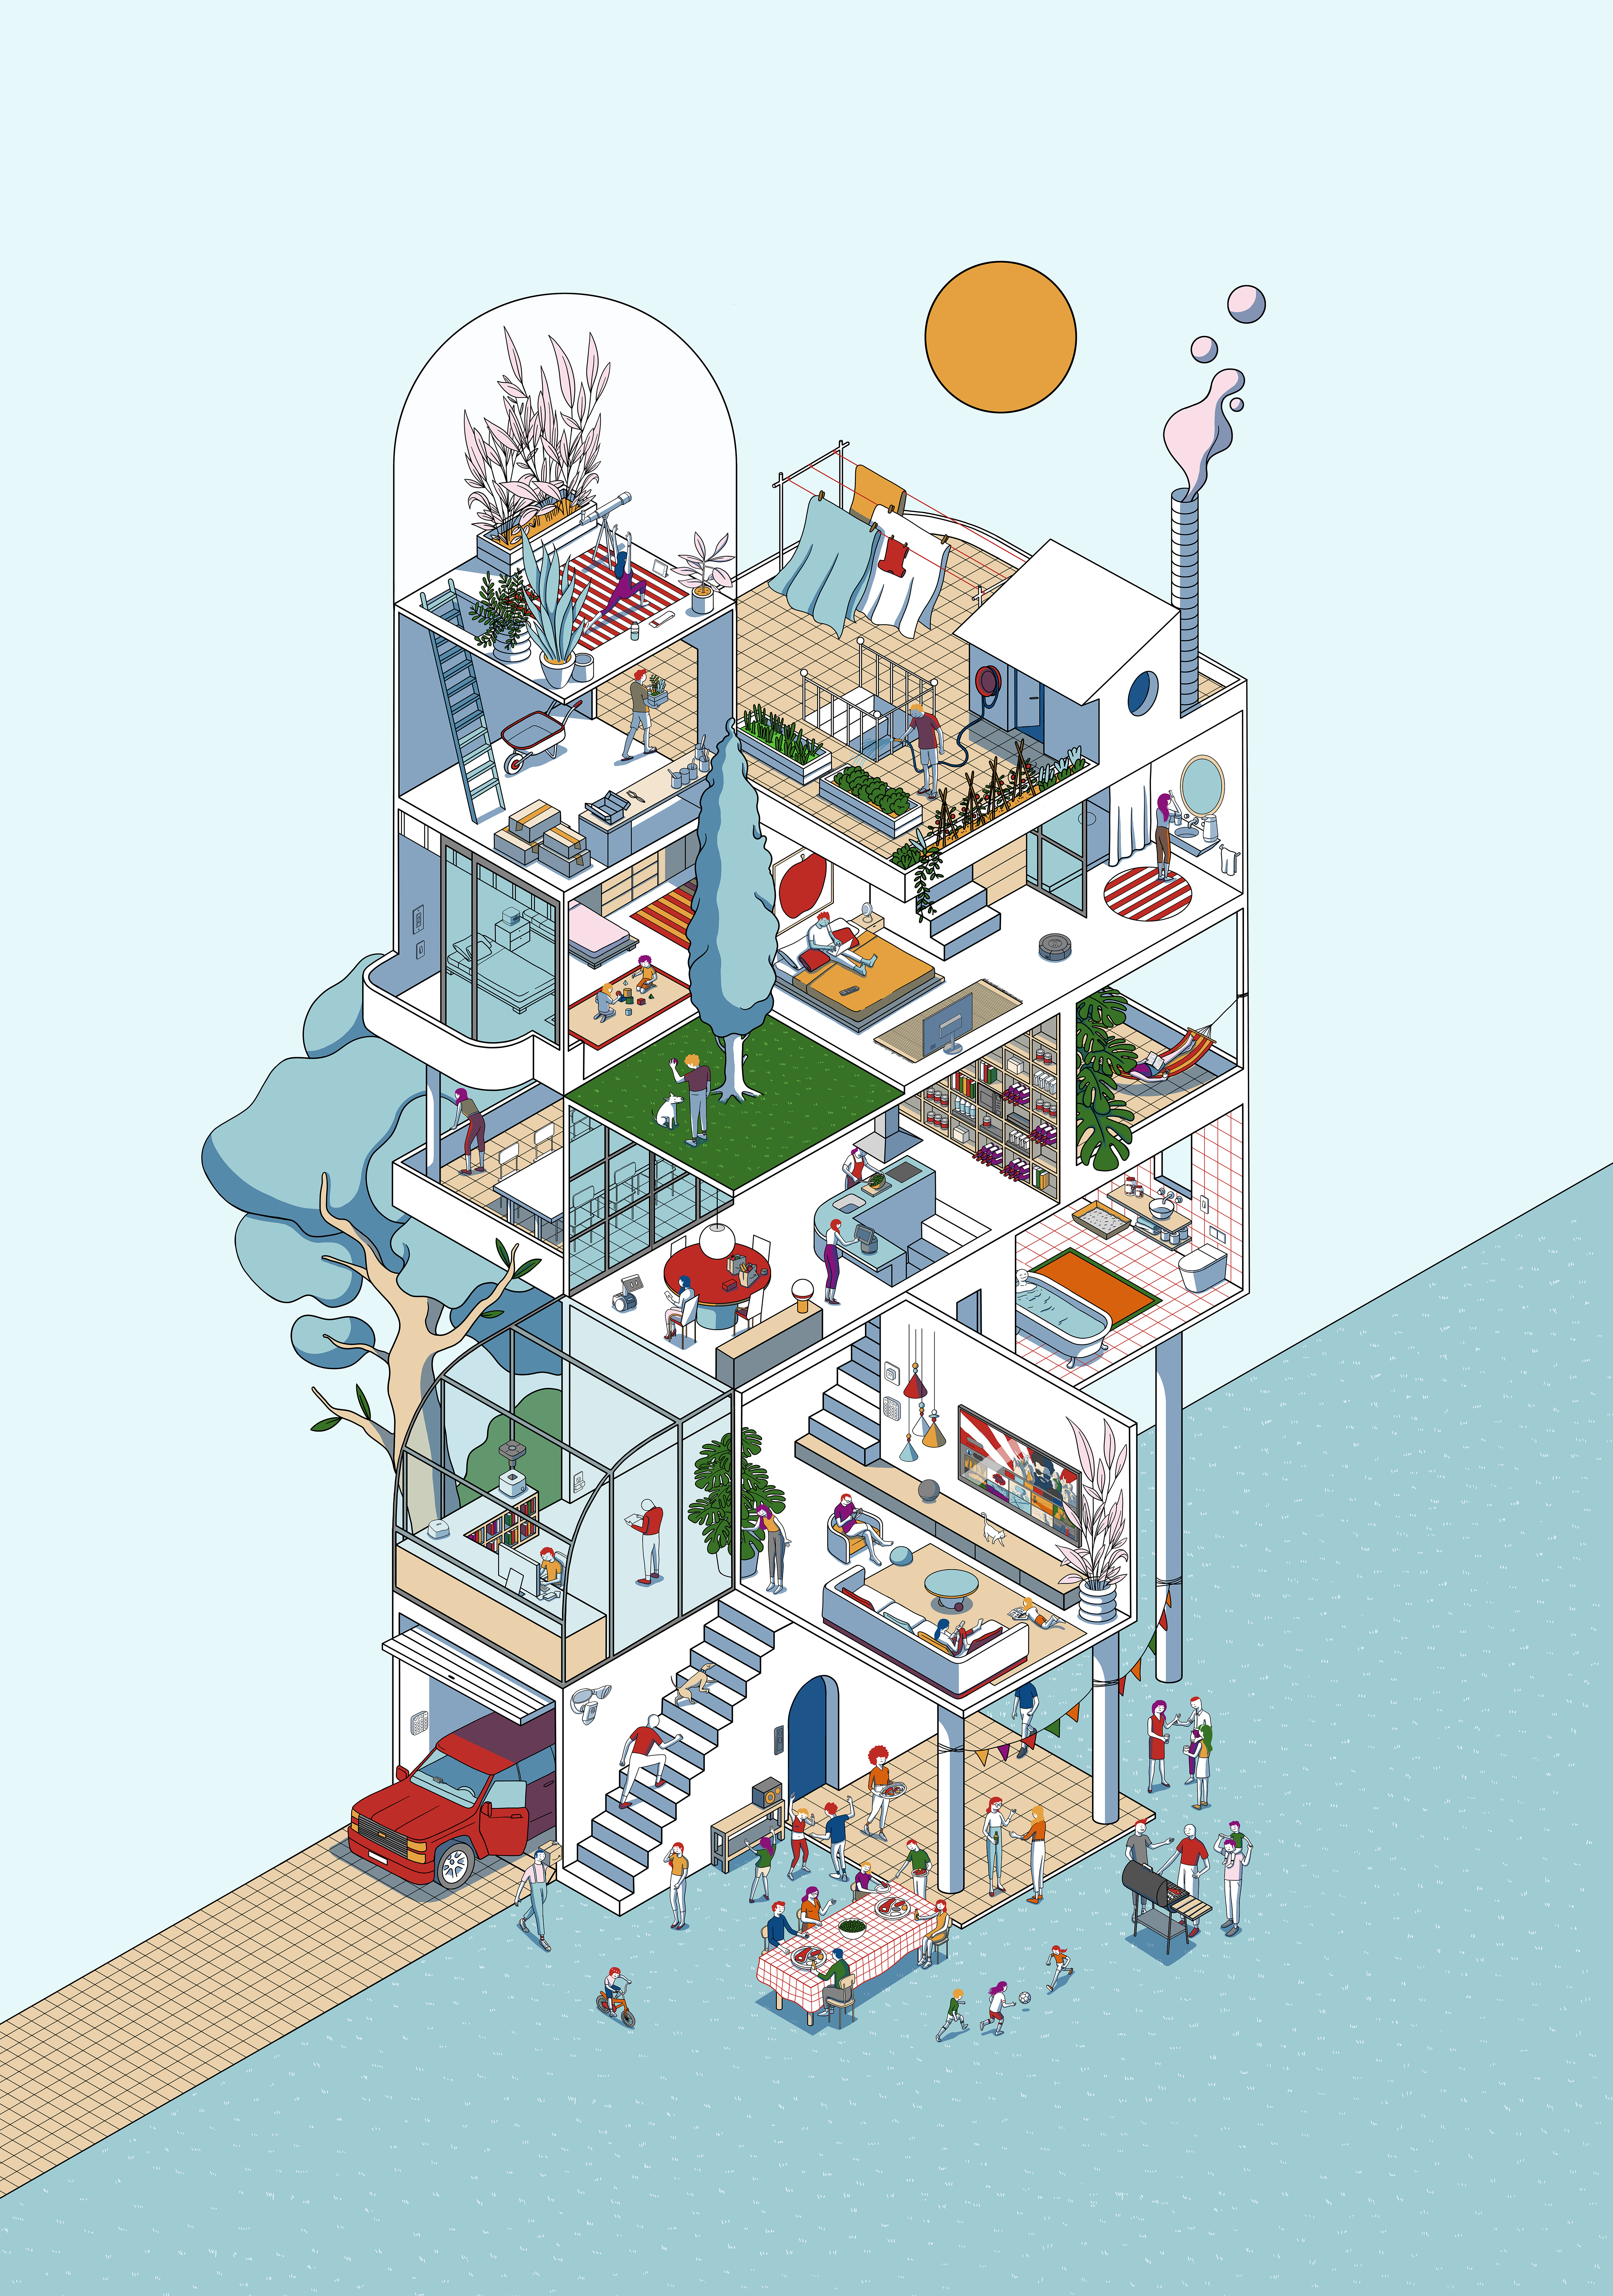 Giant cutaway house illustration filled with Amazon products